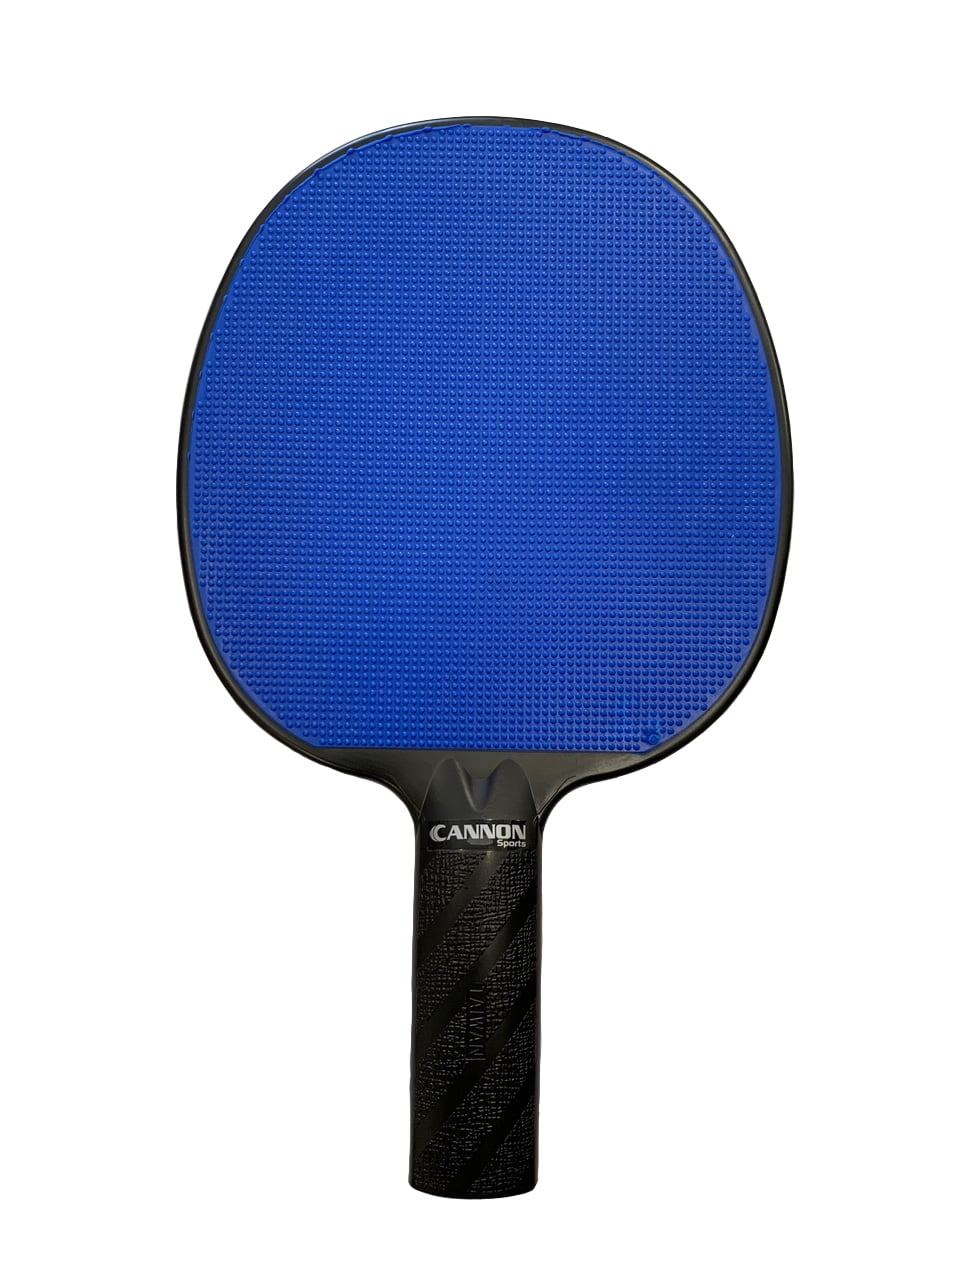 Cannon Sports Table Tennis Paddle Unbreakable and Weather Resistant for Ind... 